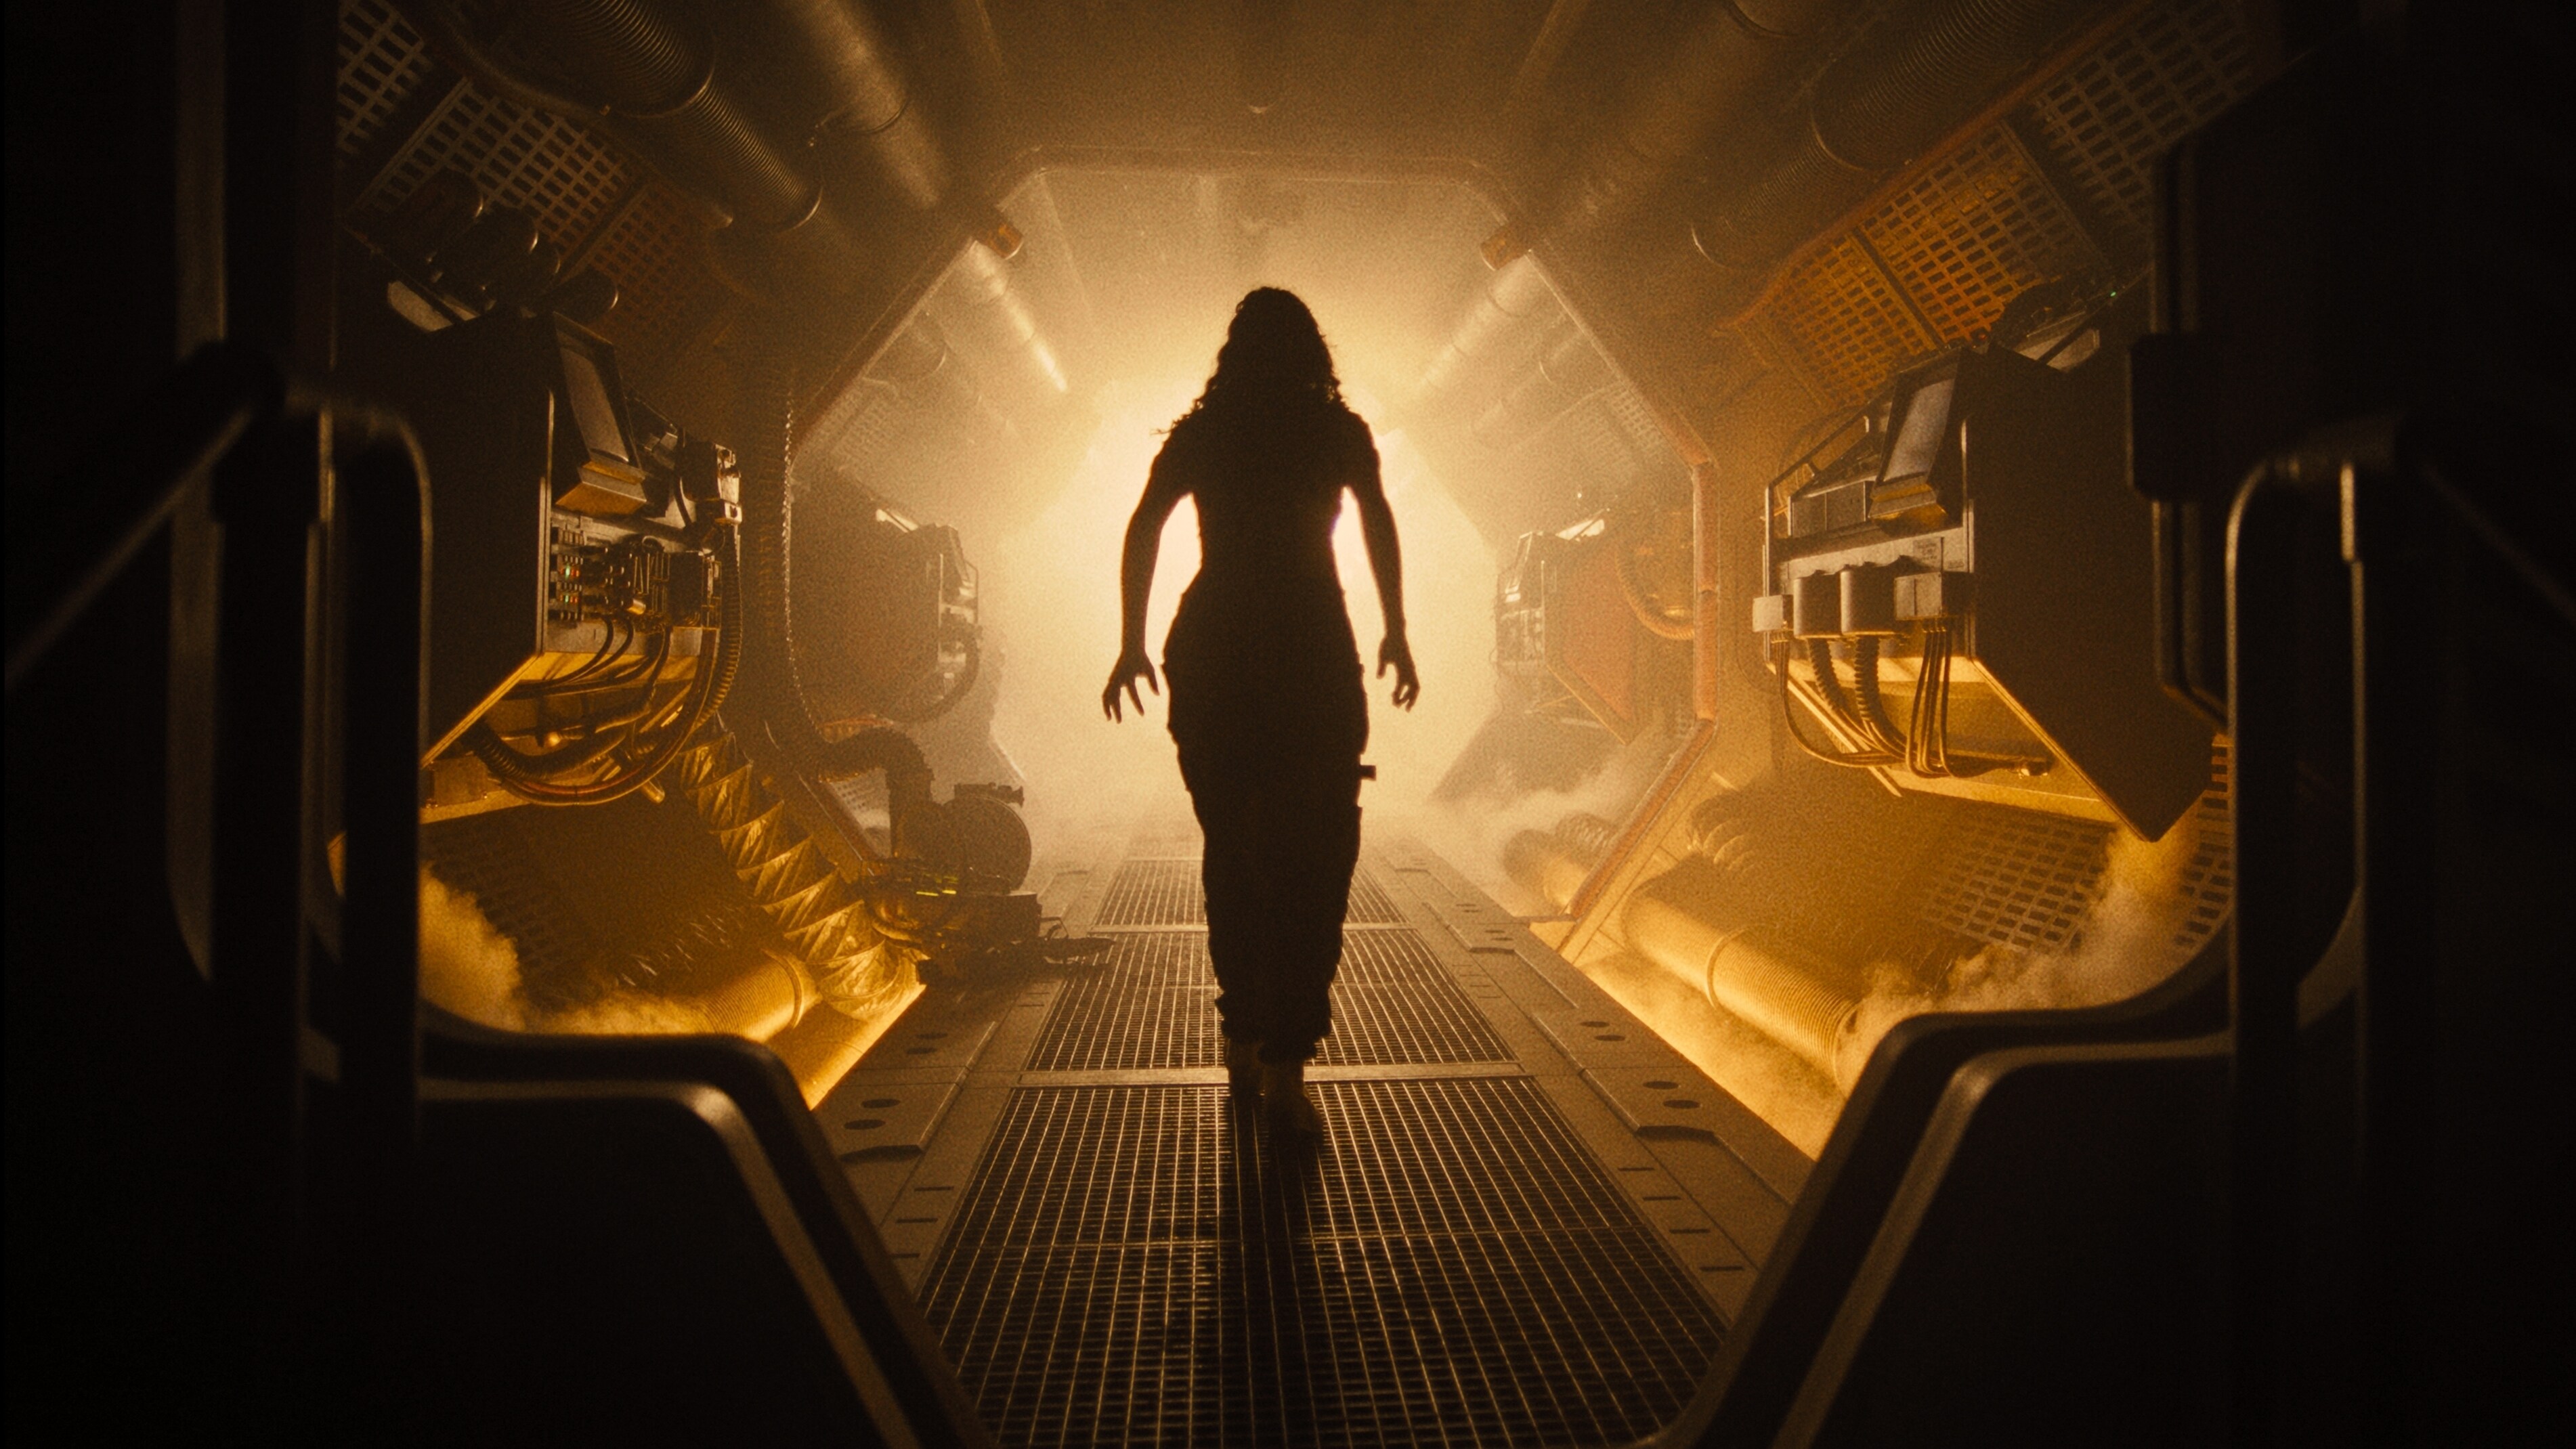 “ALIEN: ROMULUS” TEASER TRAILER AND POSTER AVAILABLE NOW- IN CINEMAS 16 AUGUST